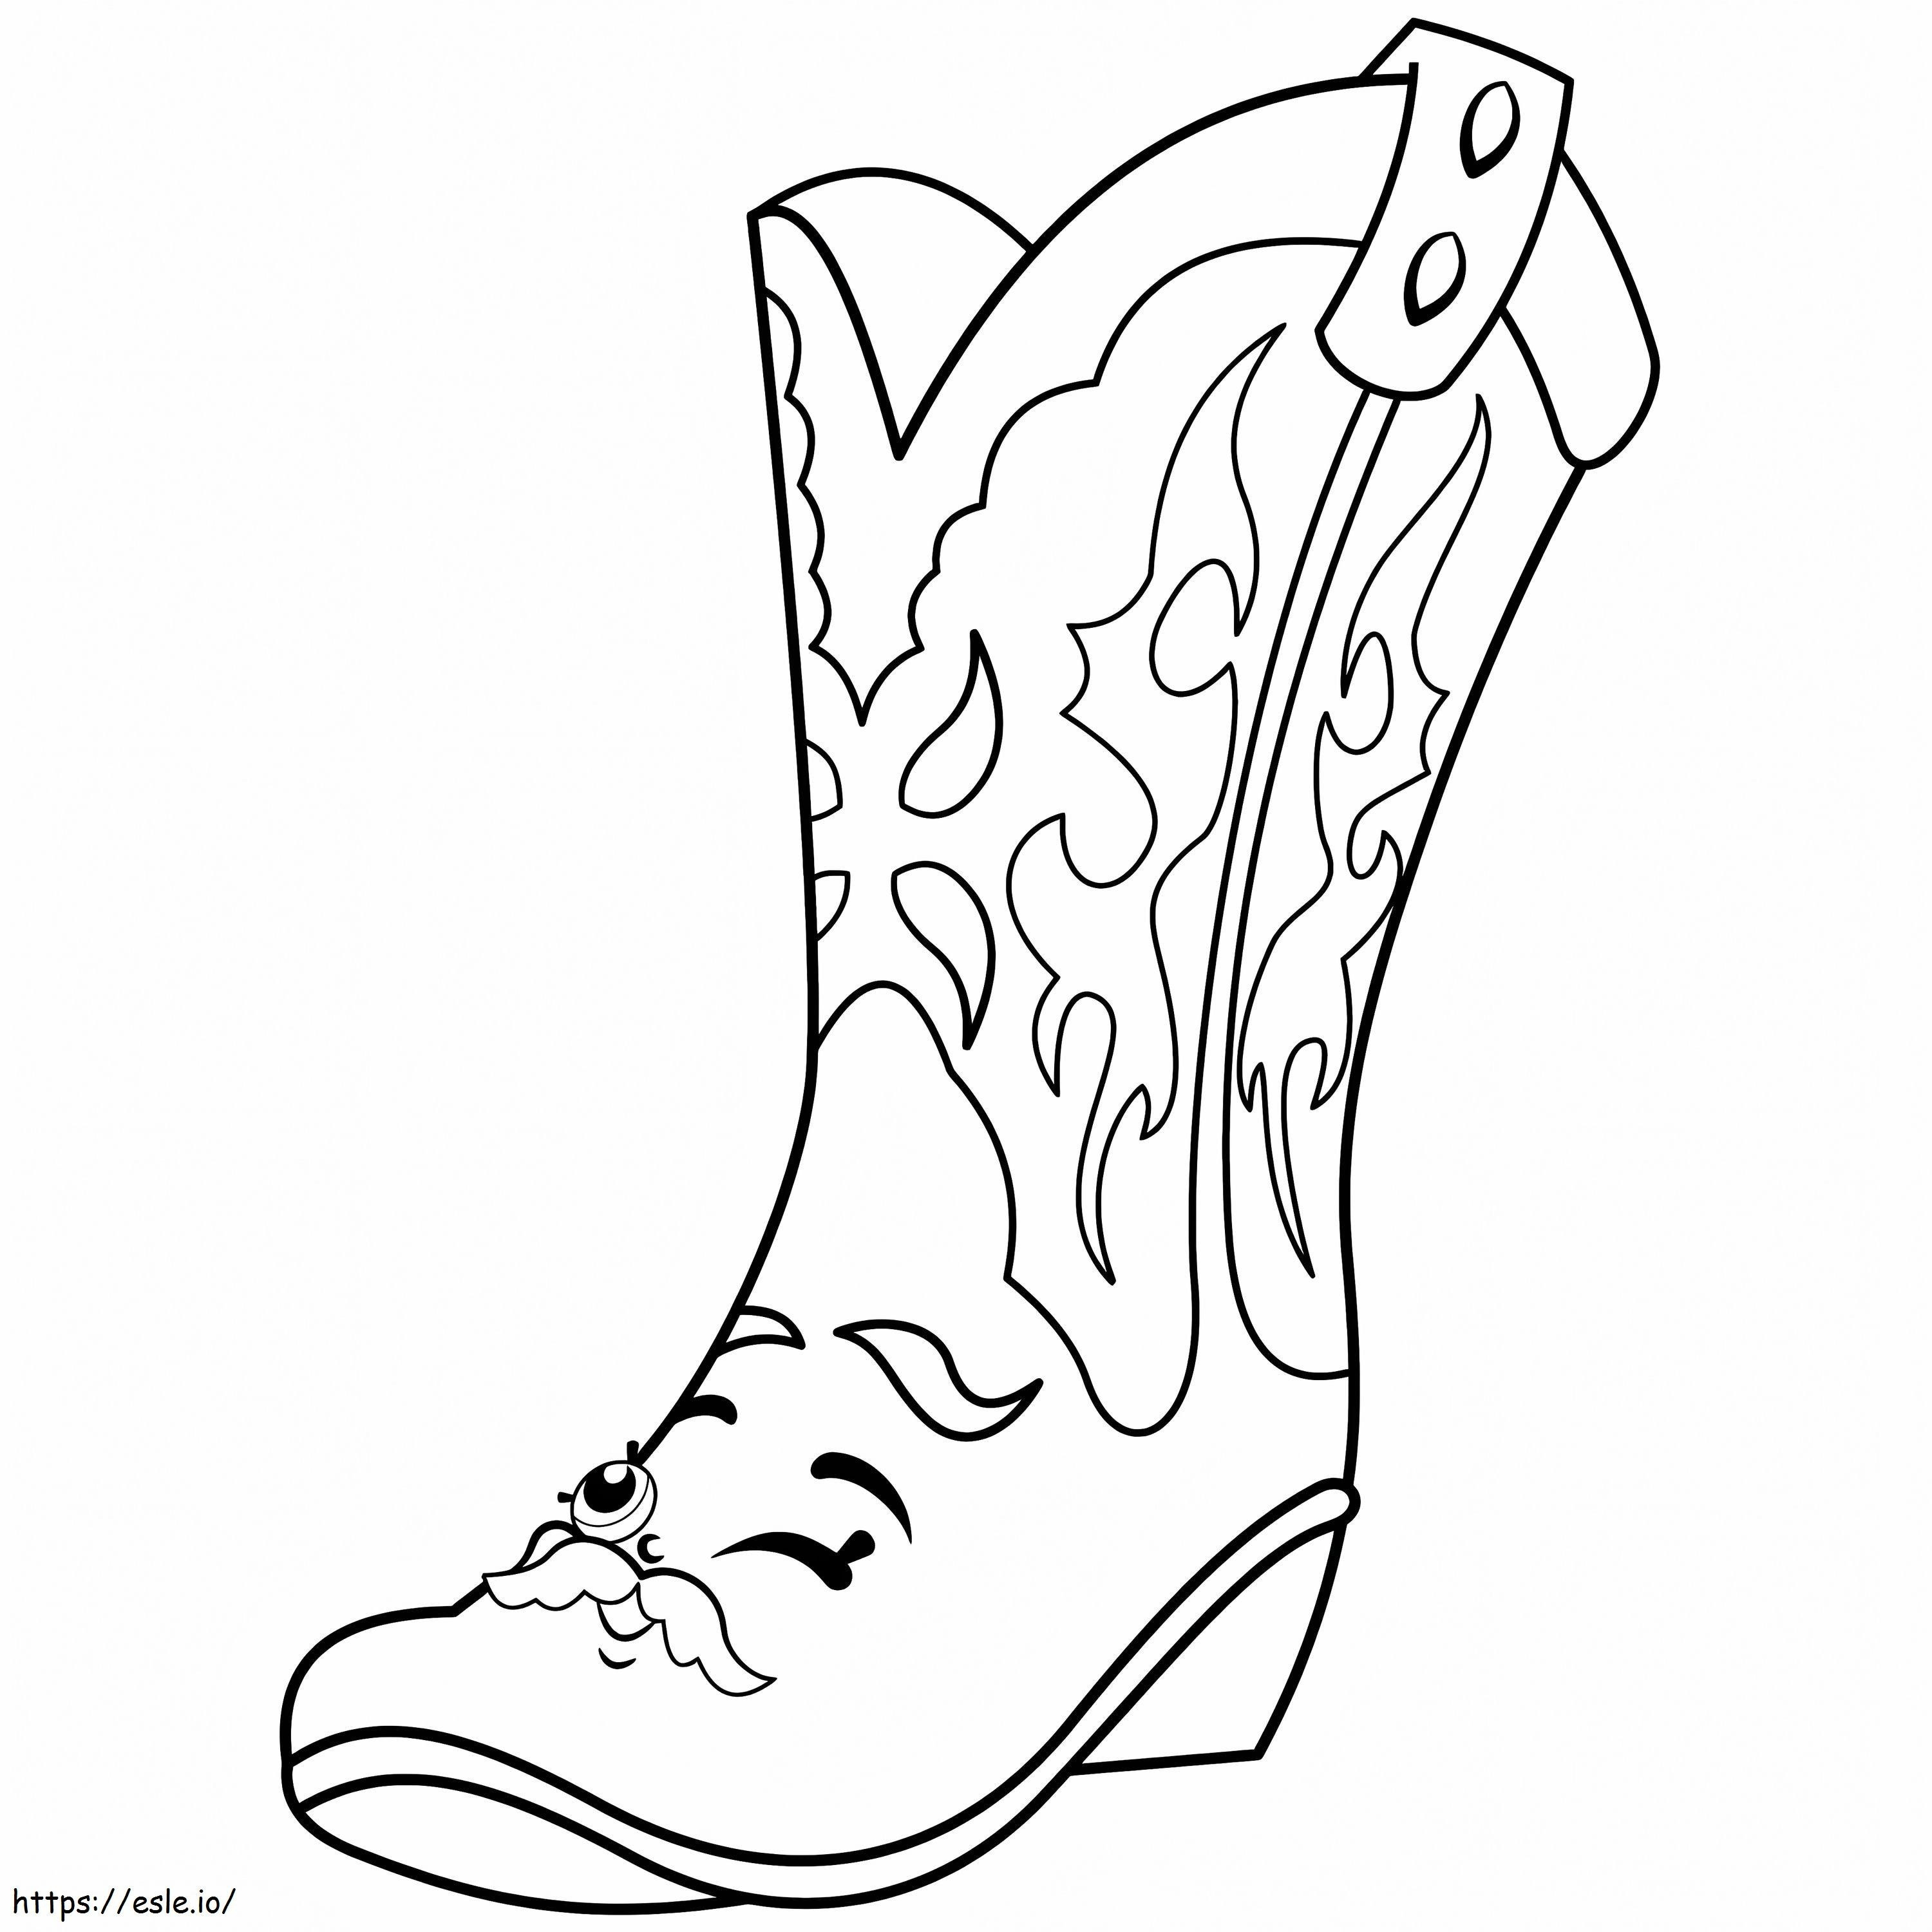 Betty Boot Shopkins coloring page